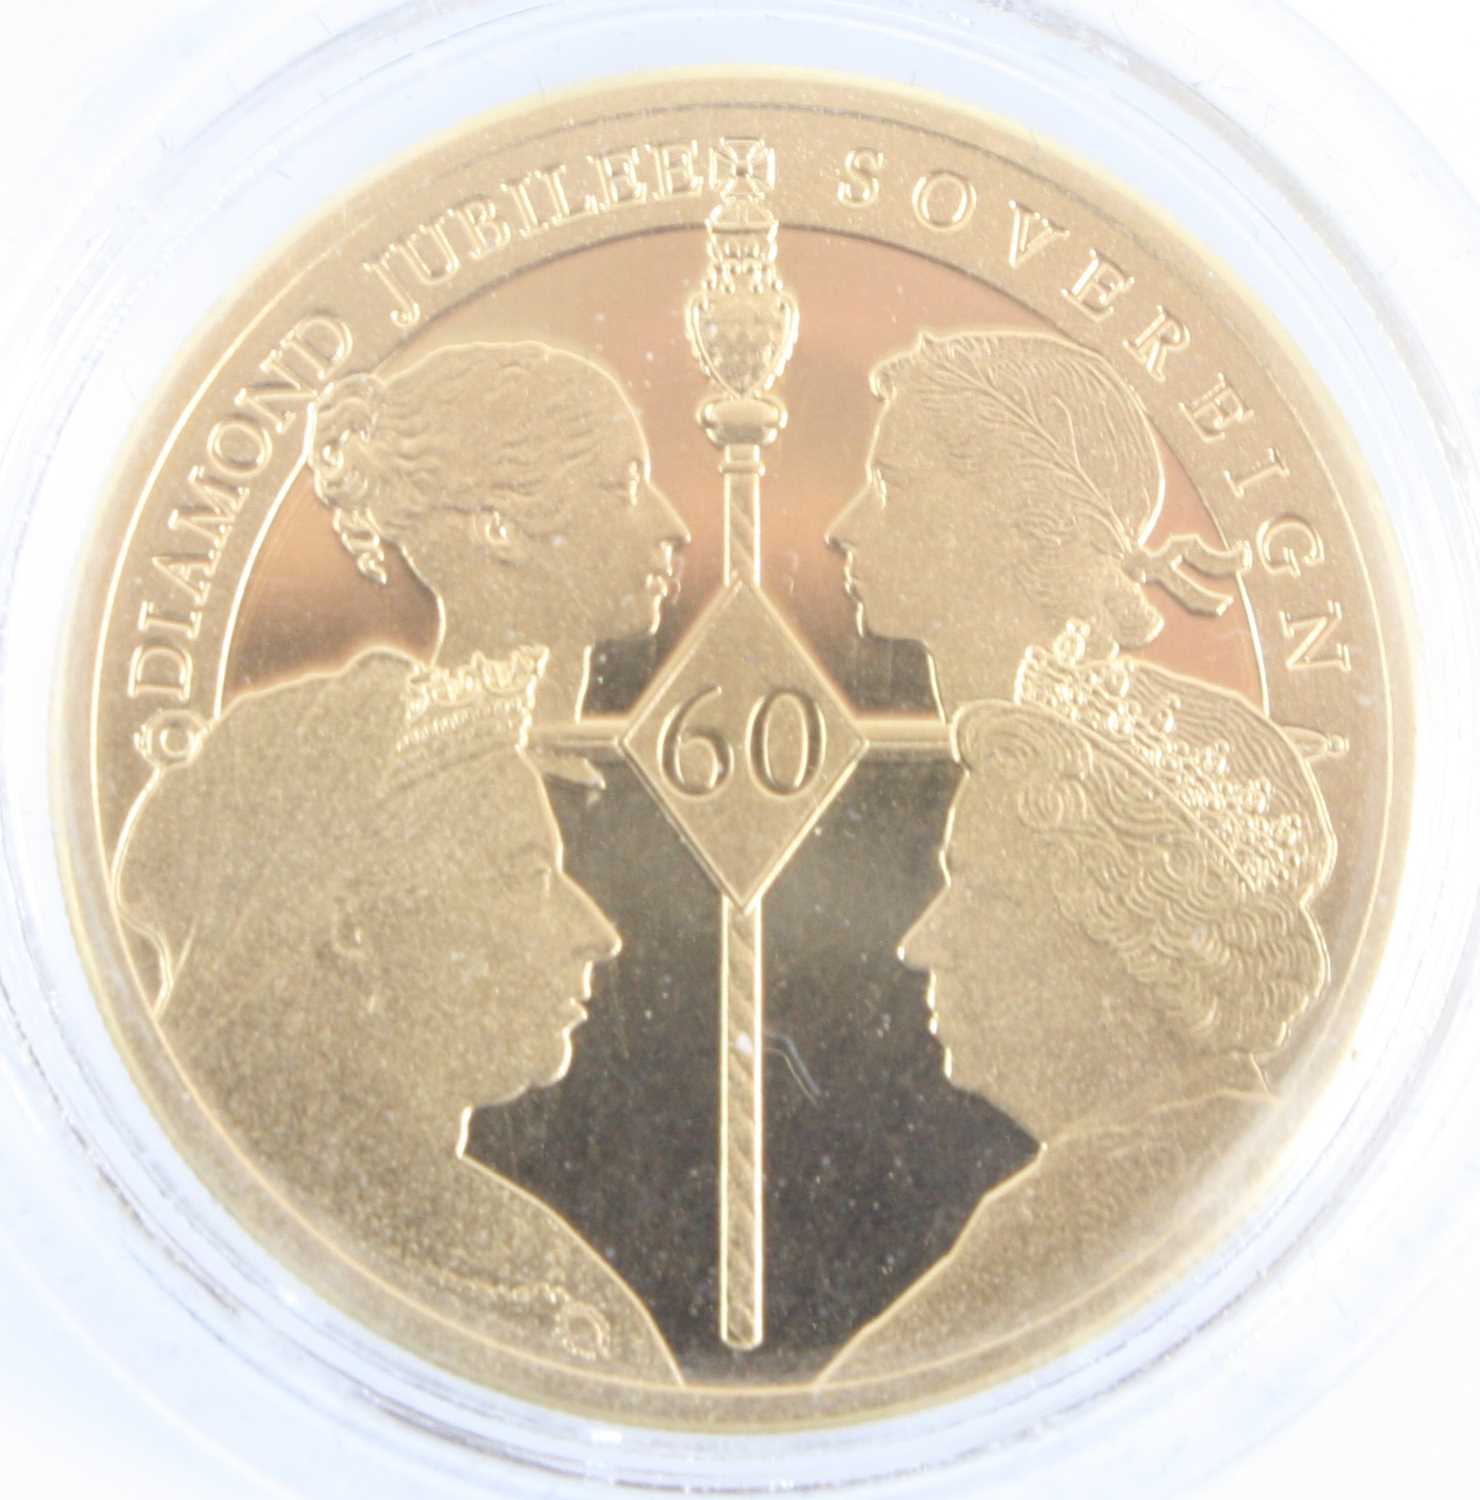 Tristan Da Cunha, The 2012 Double Jubilee Double Portrait Gold Sovereign, with certificate in - Image 3 of 3